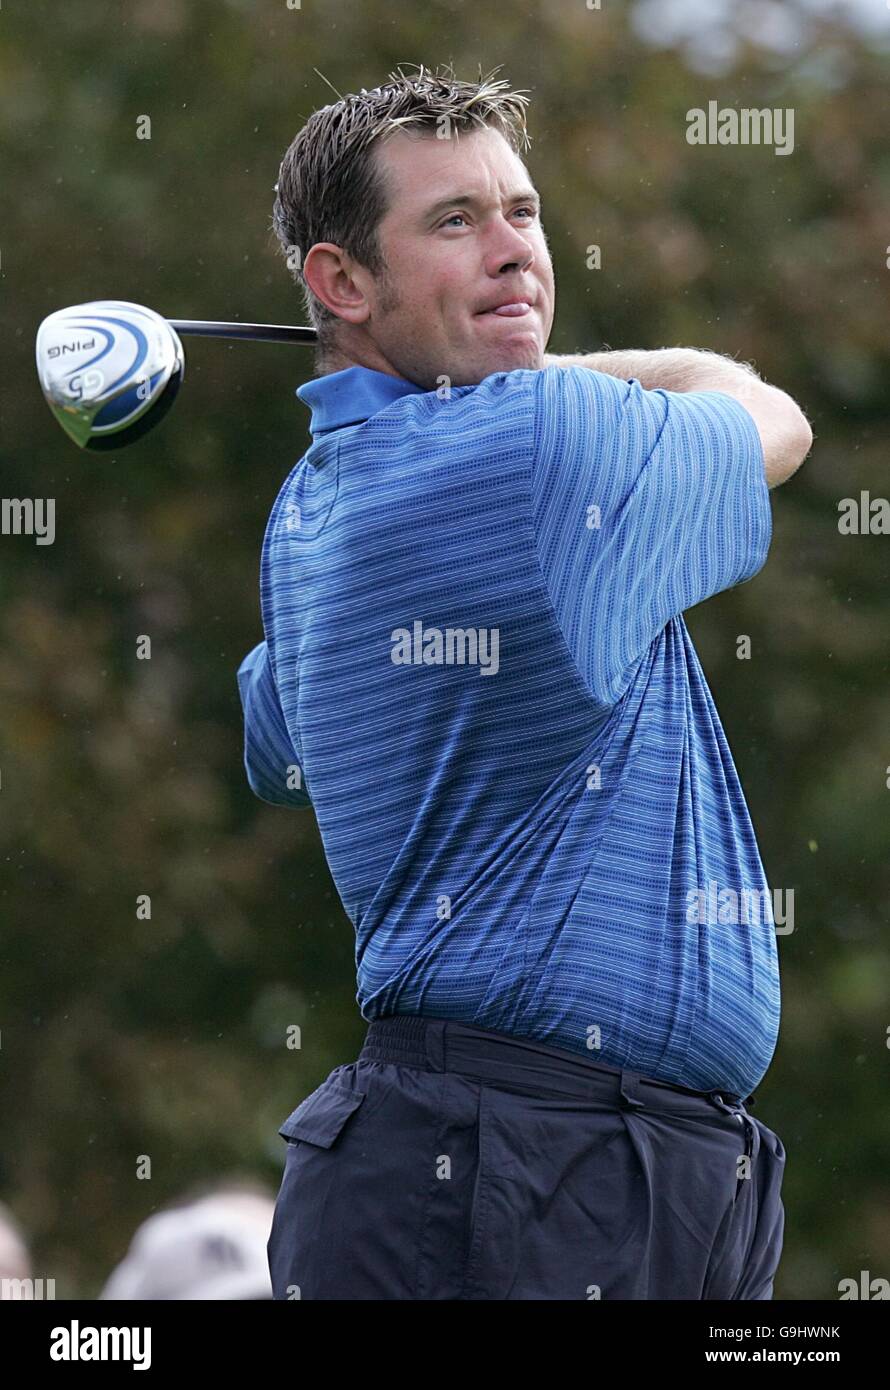 Golf - 36th Ryder Cup - Day Two - The K Club. Lee Westwood, Europe Ryder Cup Team. Stock Photo